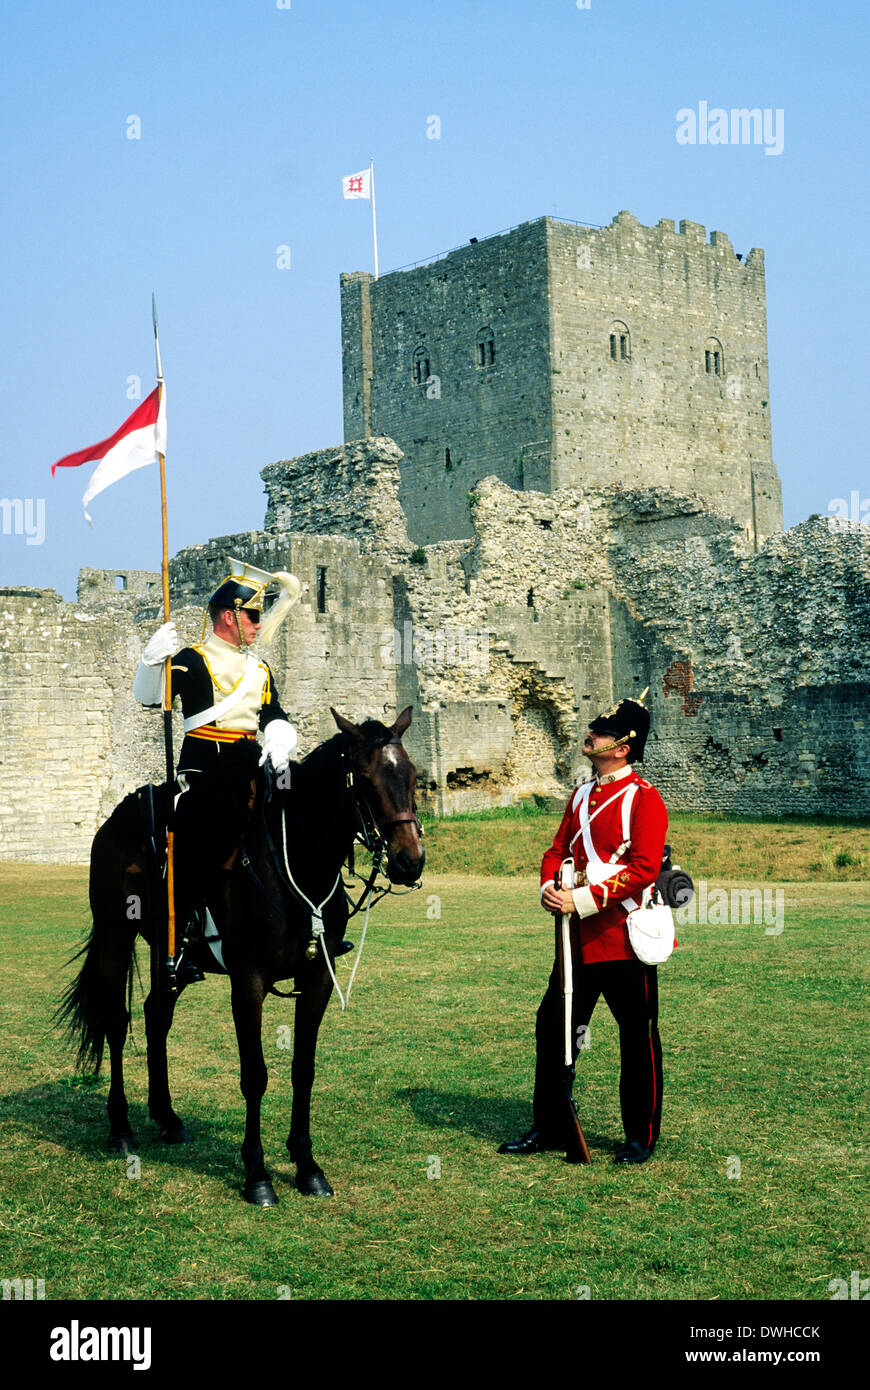 portchester-castle-hampshire-late-19th-century-british-military-17th-DWHCCK.jpg